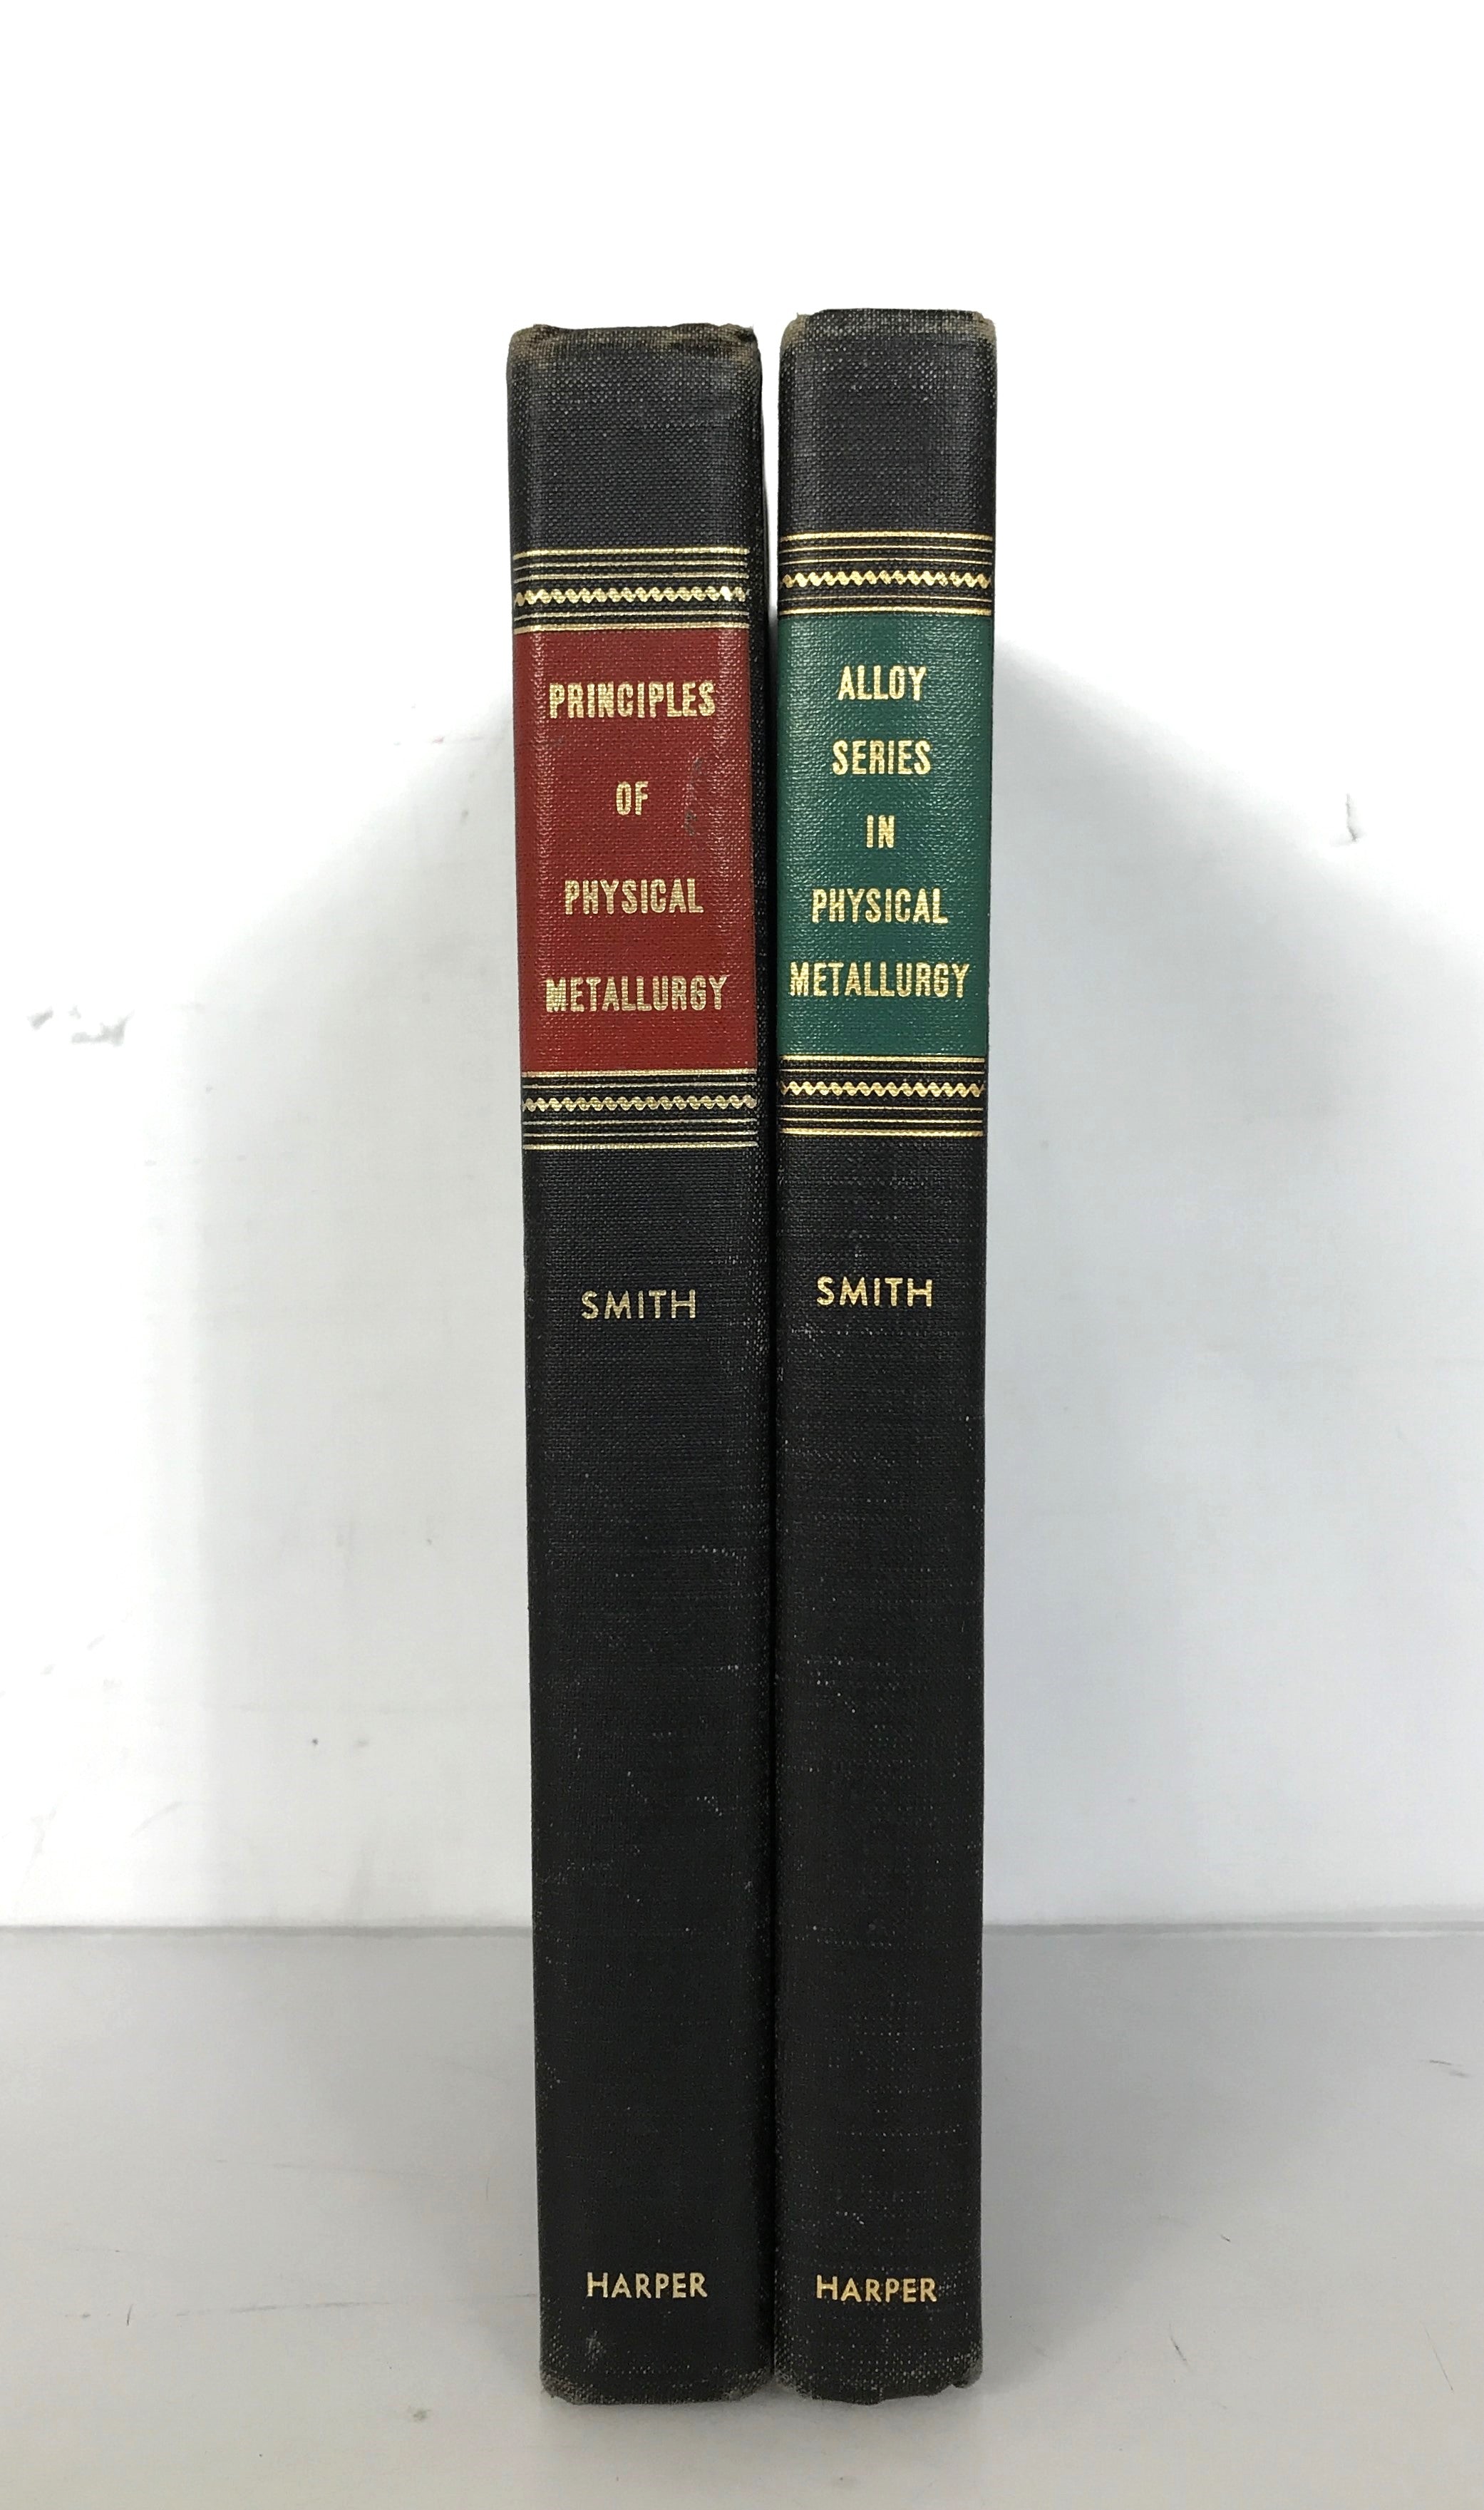 Lot of 2 Physical Metallurgy Books by Morton Smith 1956 HC